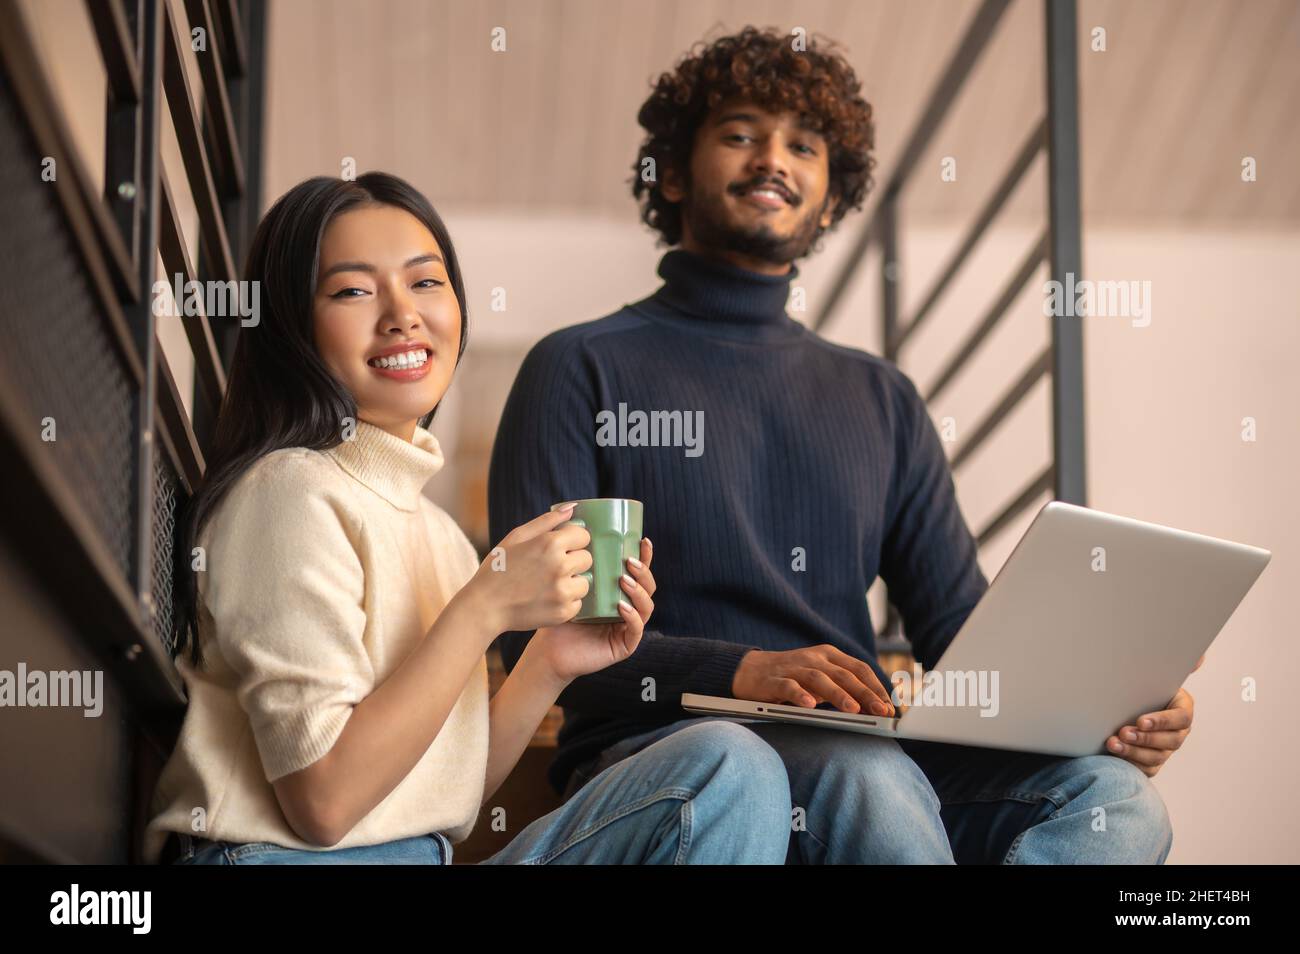 Woman with coffee man with laptop looking at camera Stock Photo